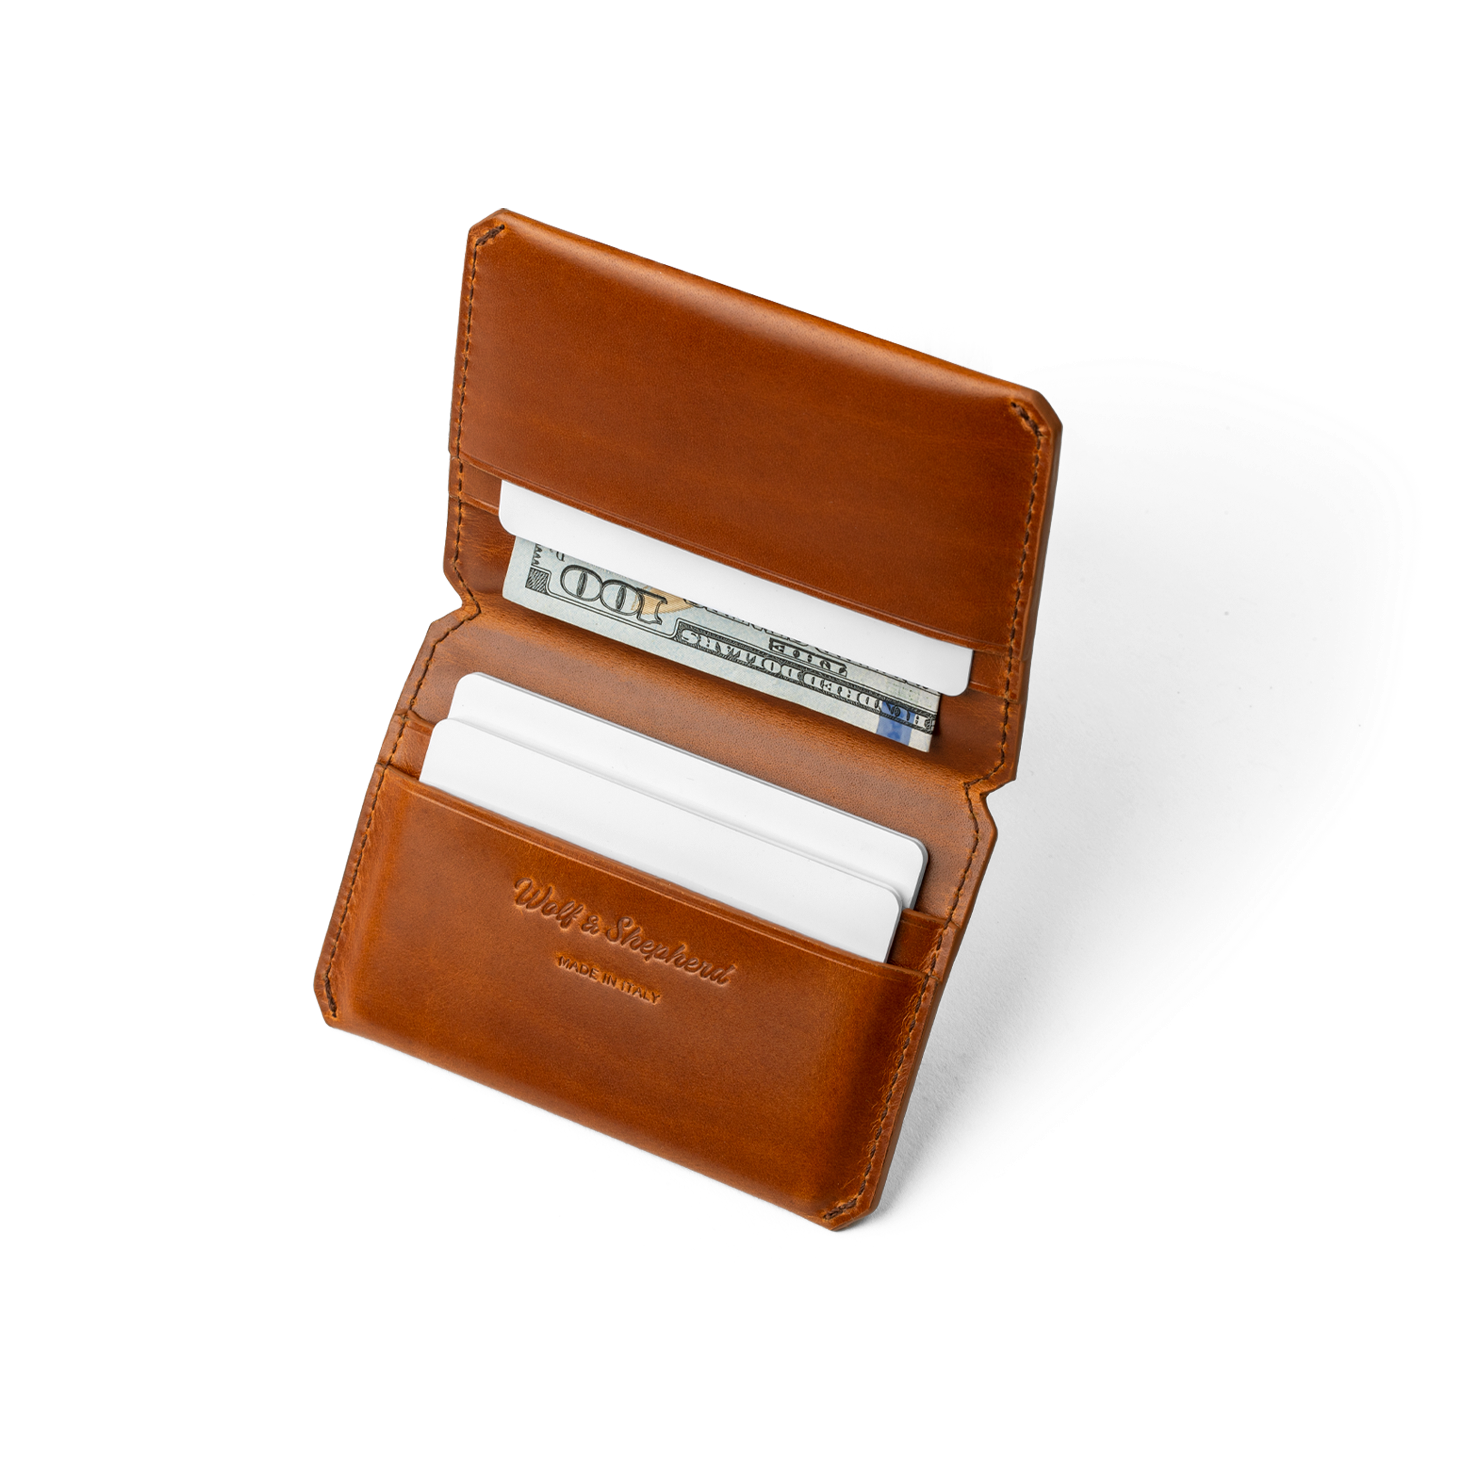 Wallets for Men - Style Guide Helps You Select Your Wallet